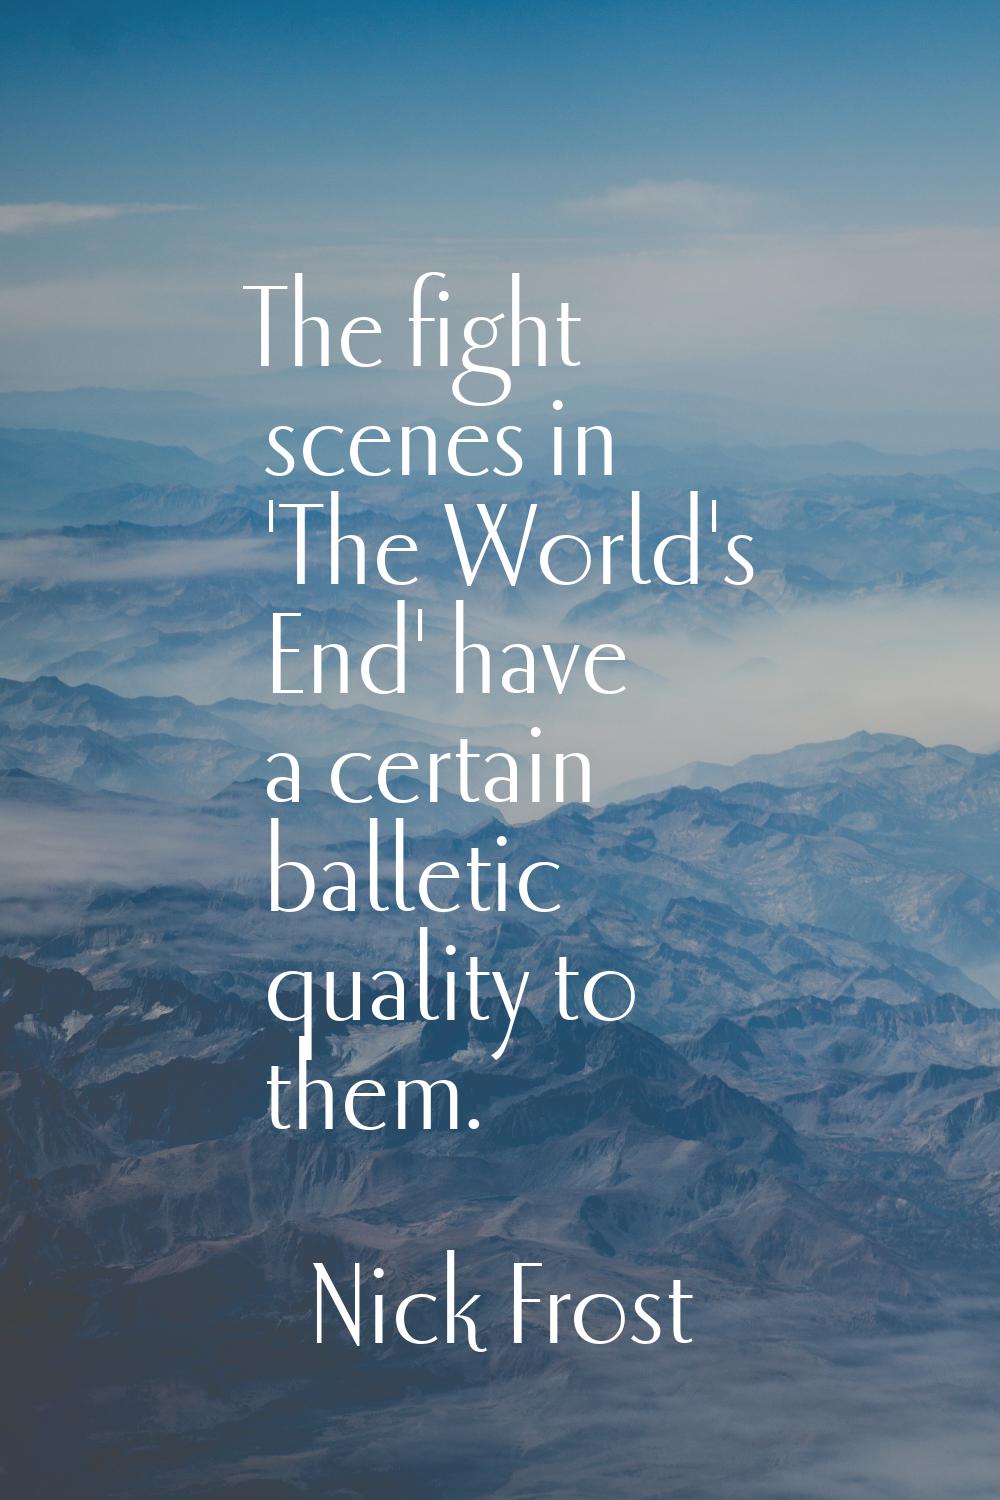 The fight scenes in 'The World's End' have a certain balletic quality to them.